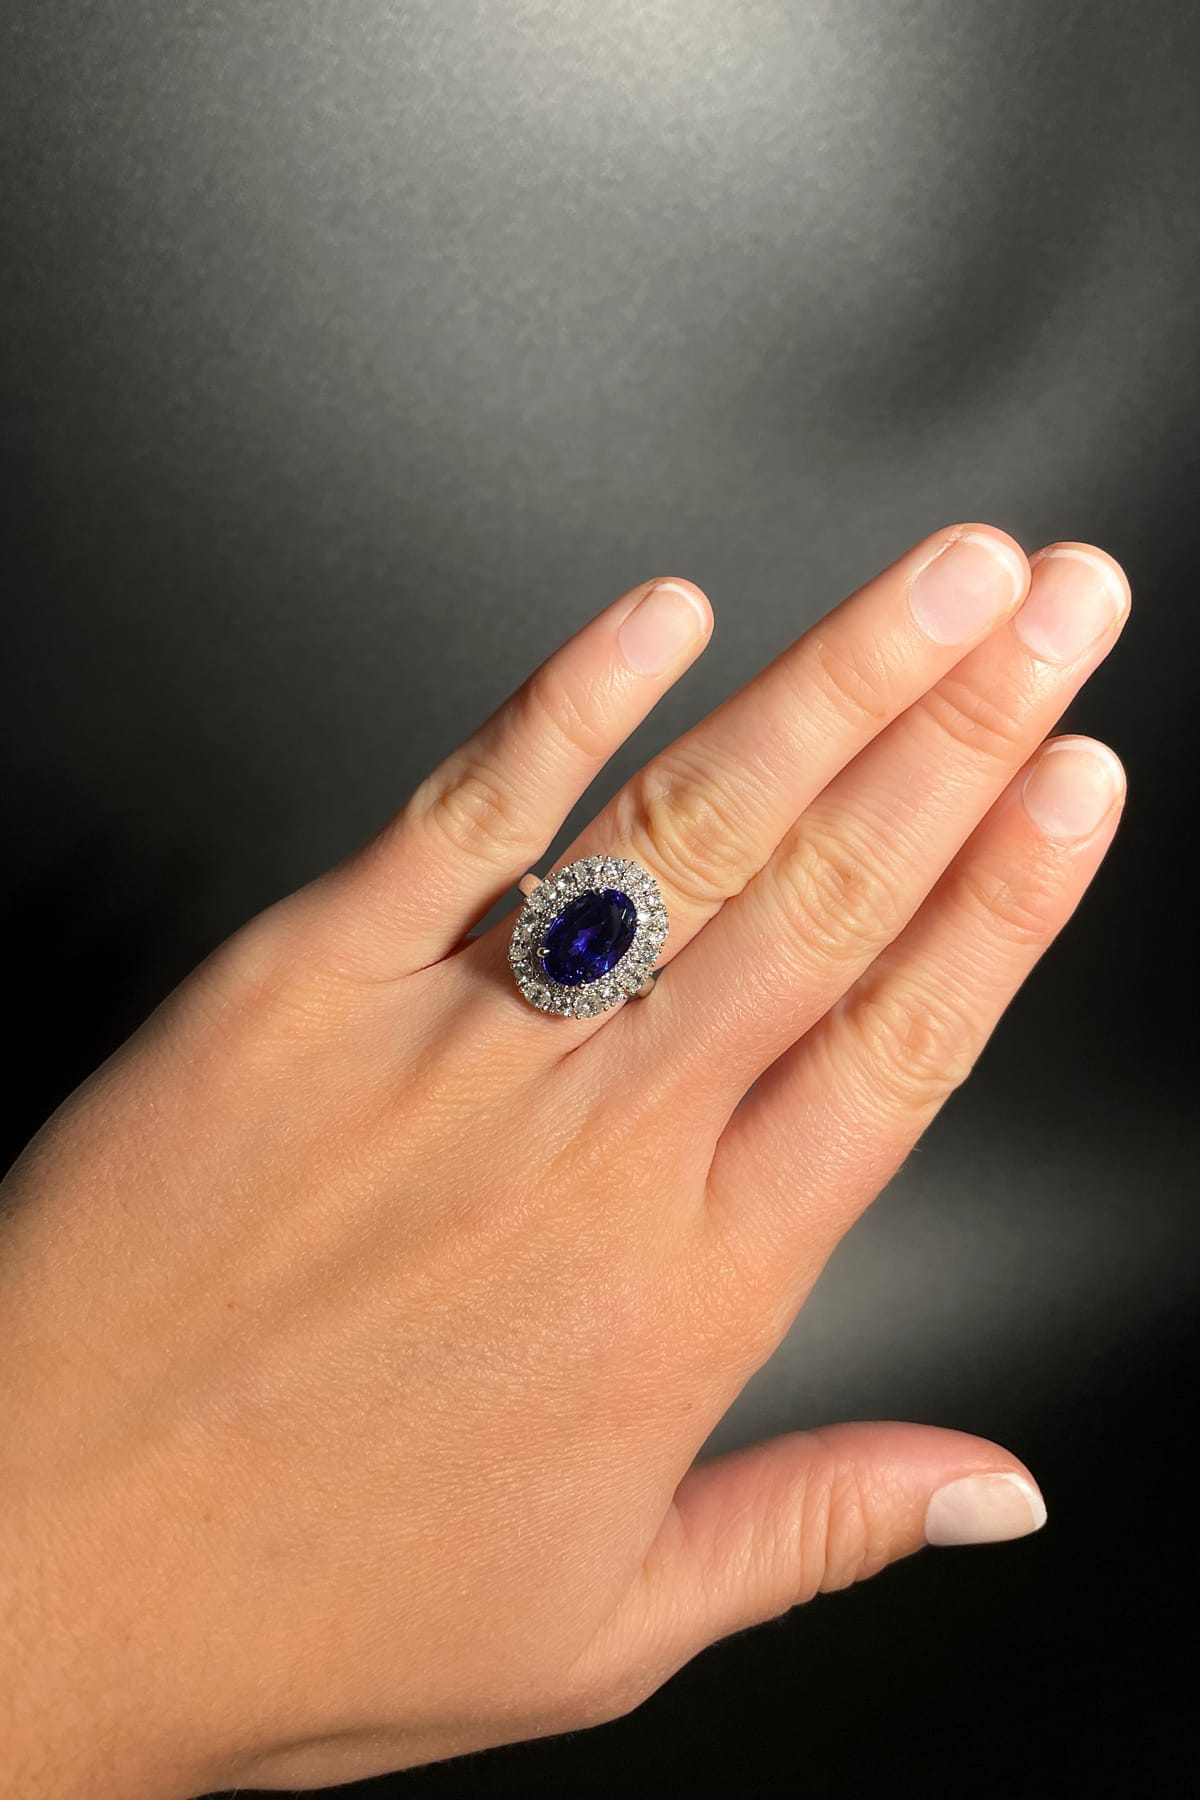 18CT WG 5.80CT OVAL TANZANITE AND DOUBLE DIAMOND HALO RING available at LeGassick Diamonds and Jewellery Gold Coast, Australia.